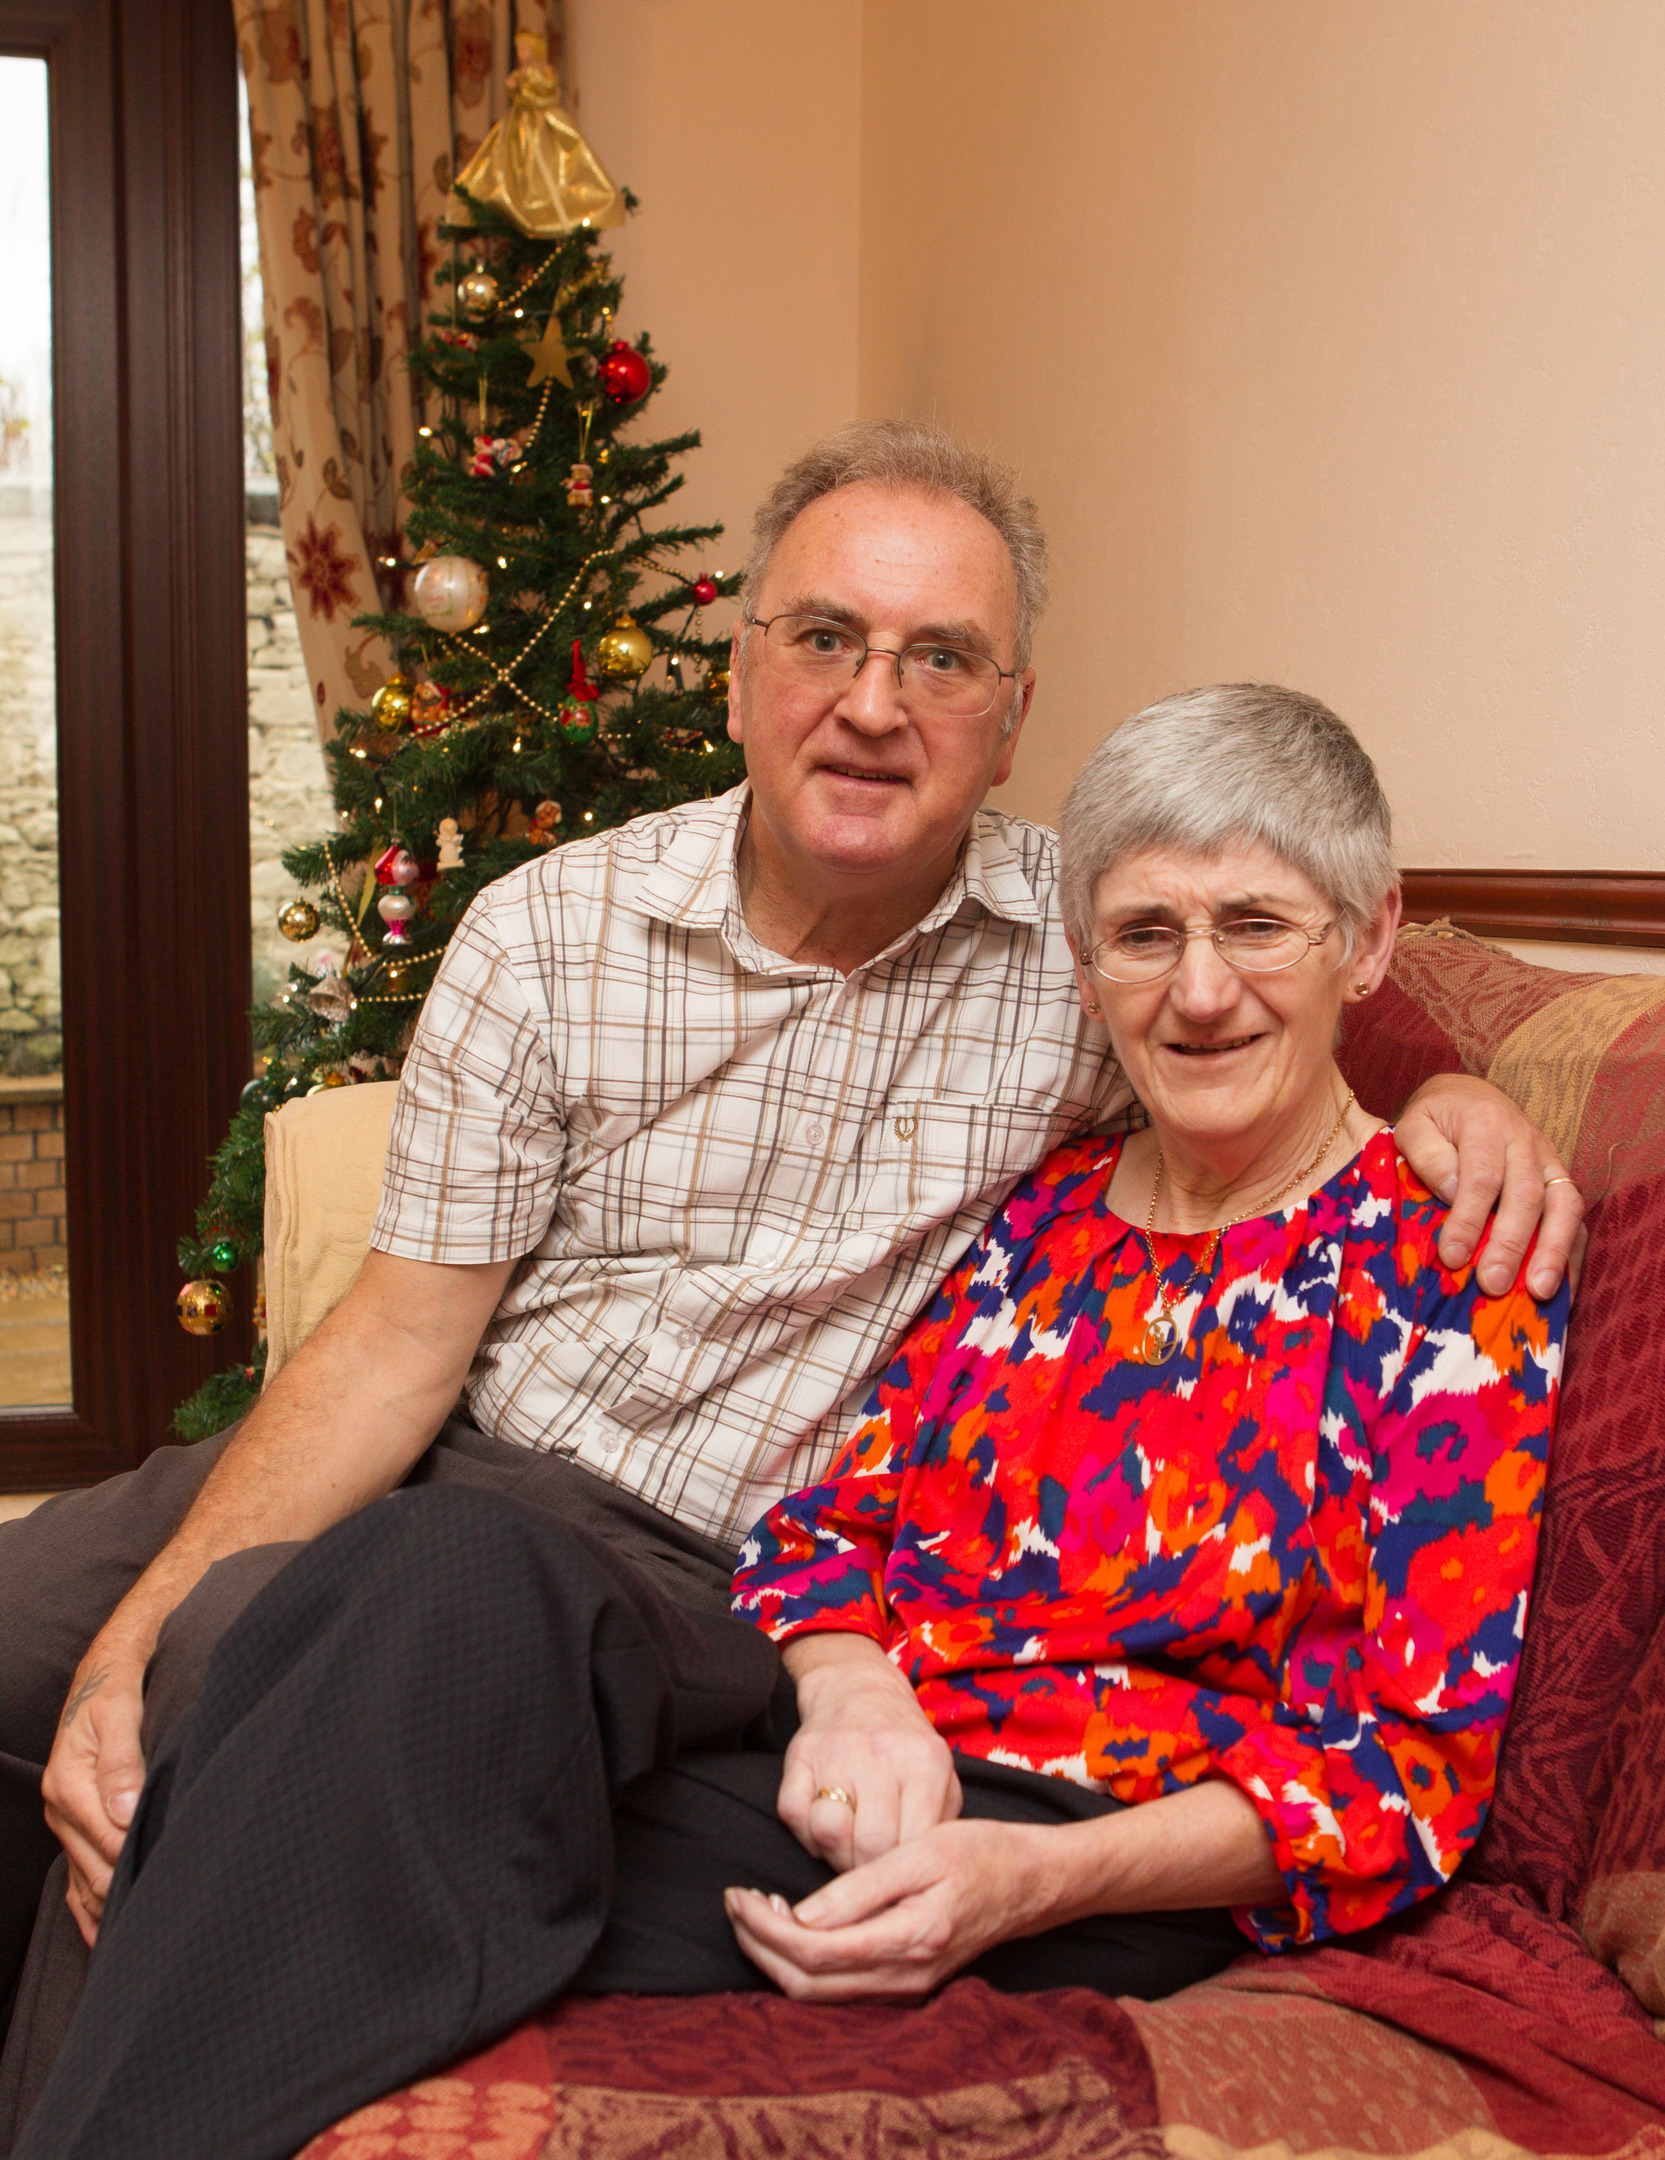 Jim and Donna Sykes from Hawick (Chris Austin / DC Thomson)